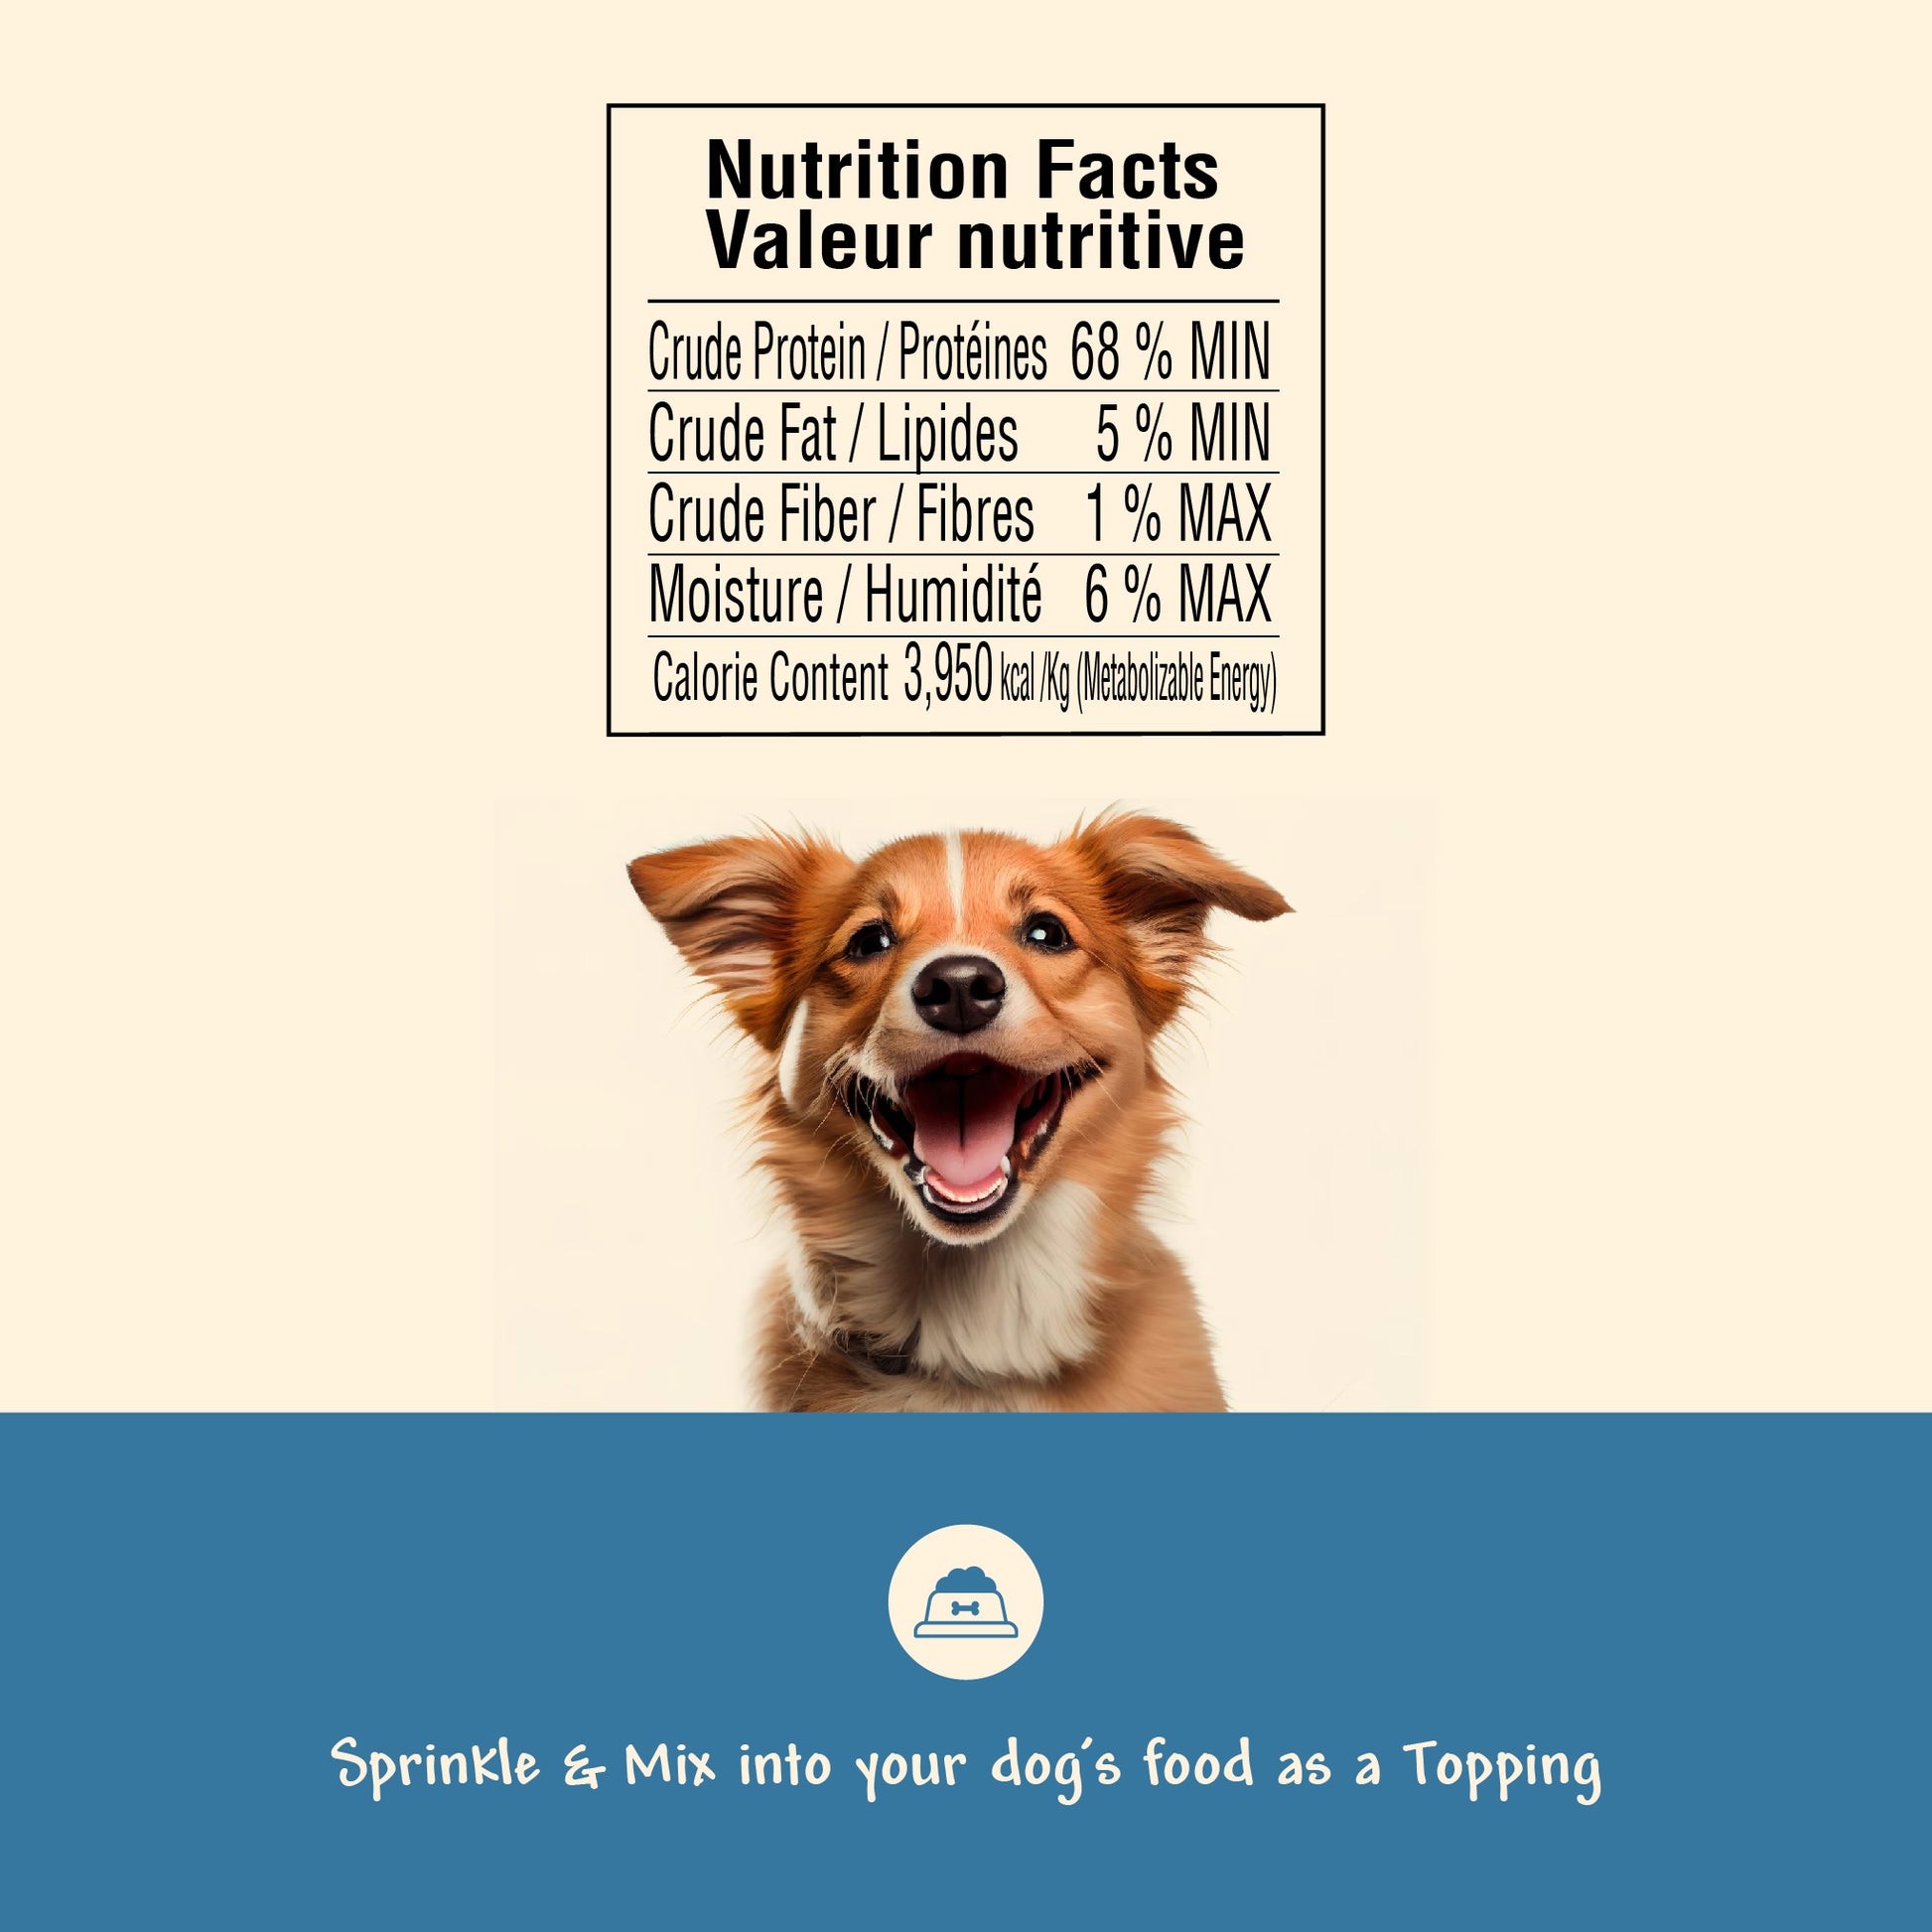 nutrition facts and directions to sprinkle and mix in dog's food as a topper